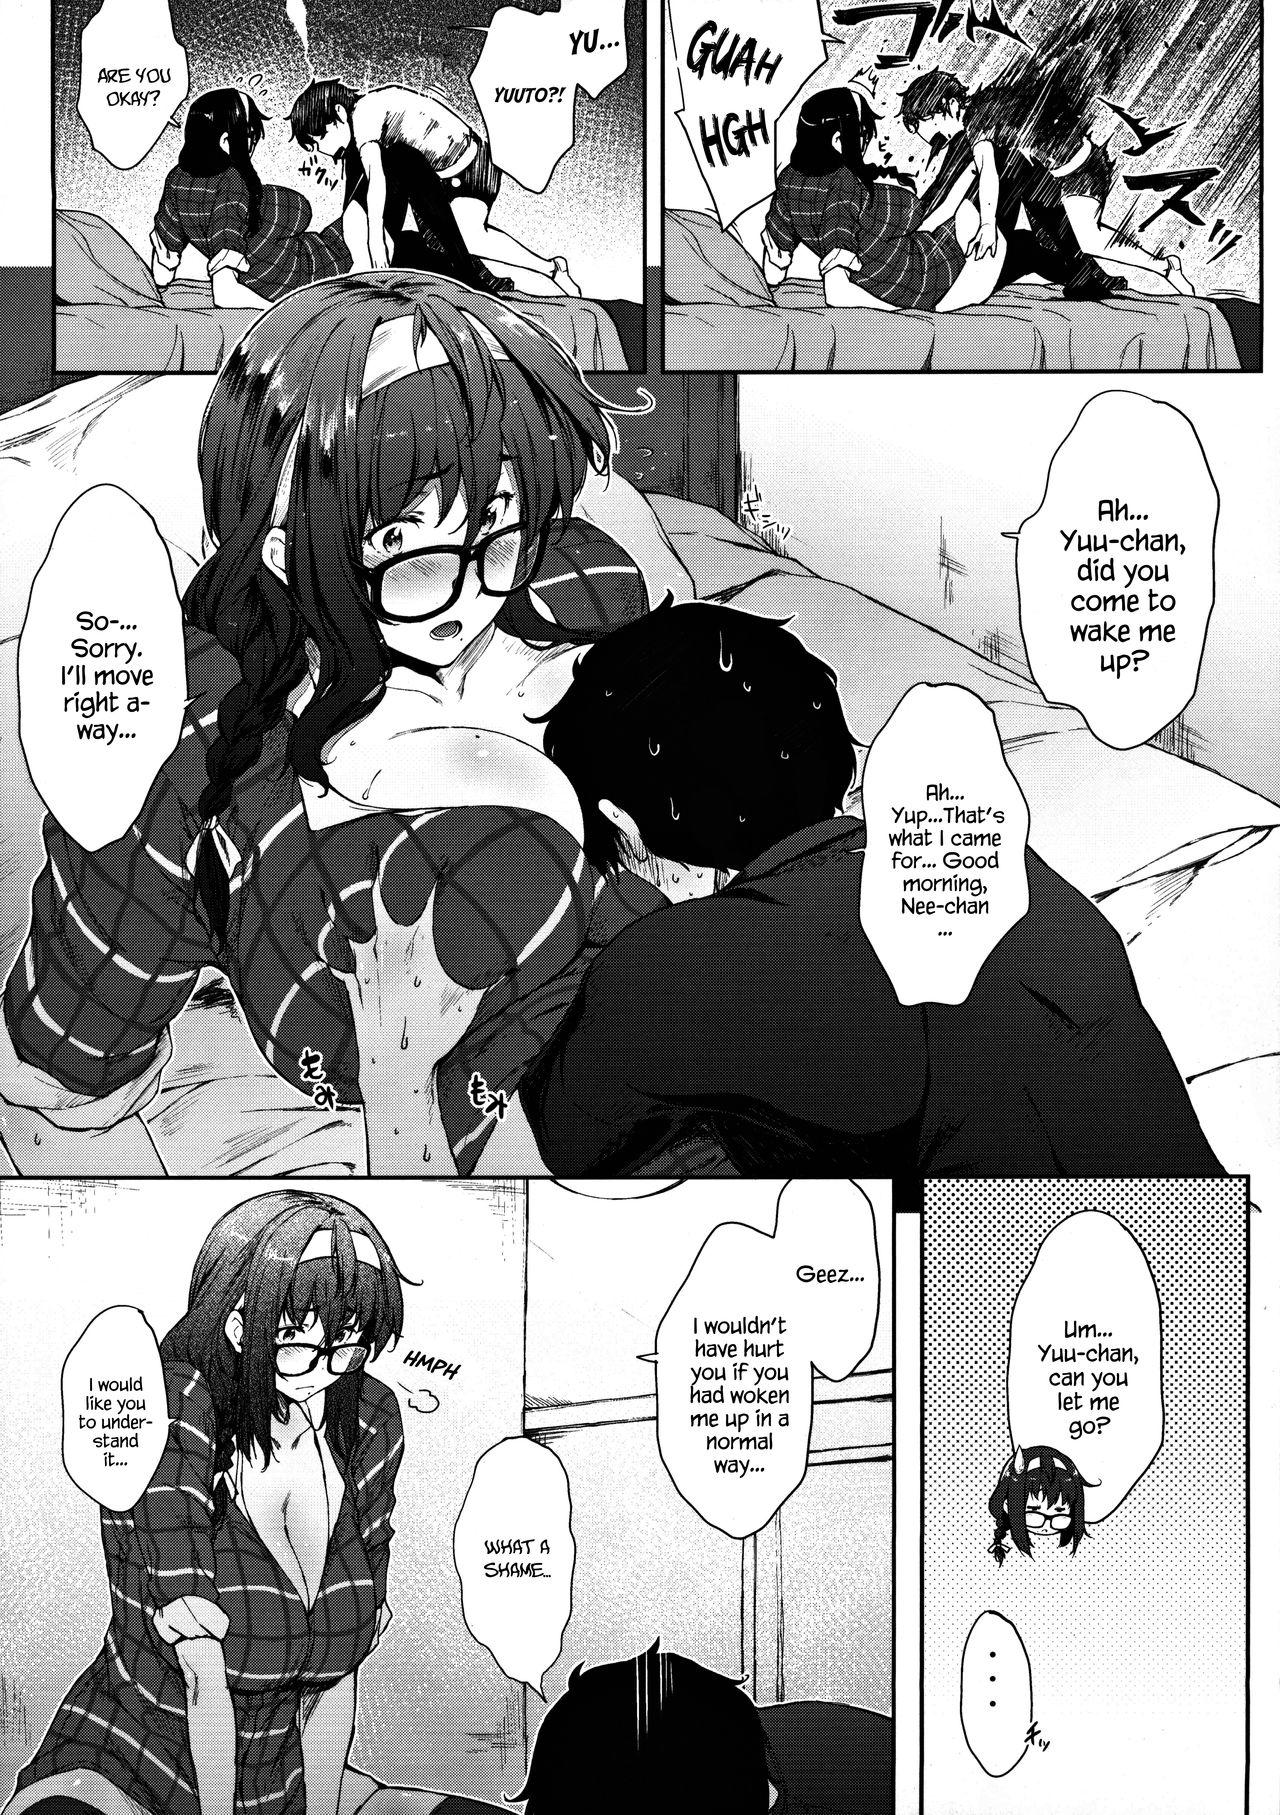 China Babaa no Inu Ma ni Nee-chan to | With My Stepsister While My Mom's Not Home - Original Erotic - Page 5